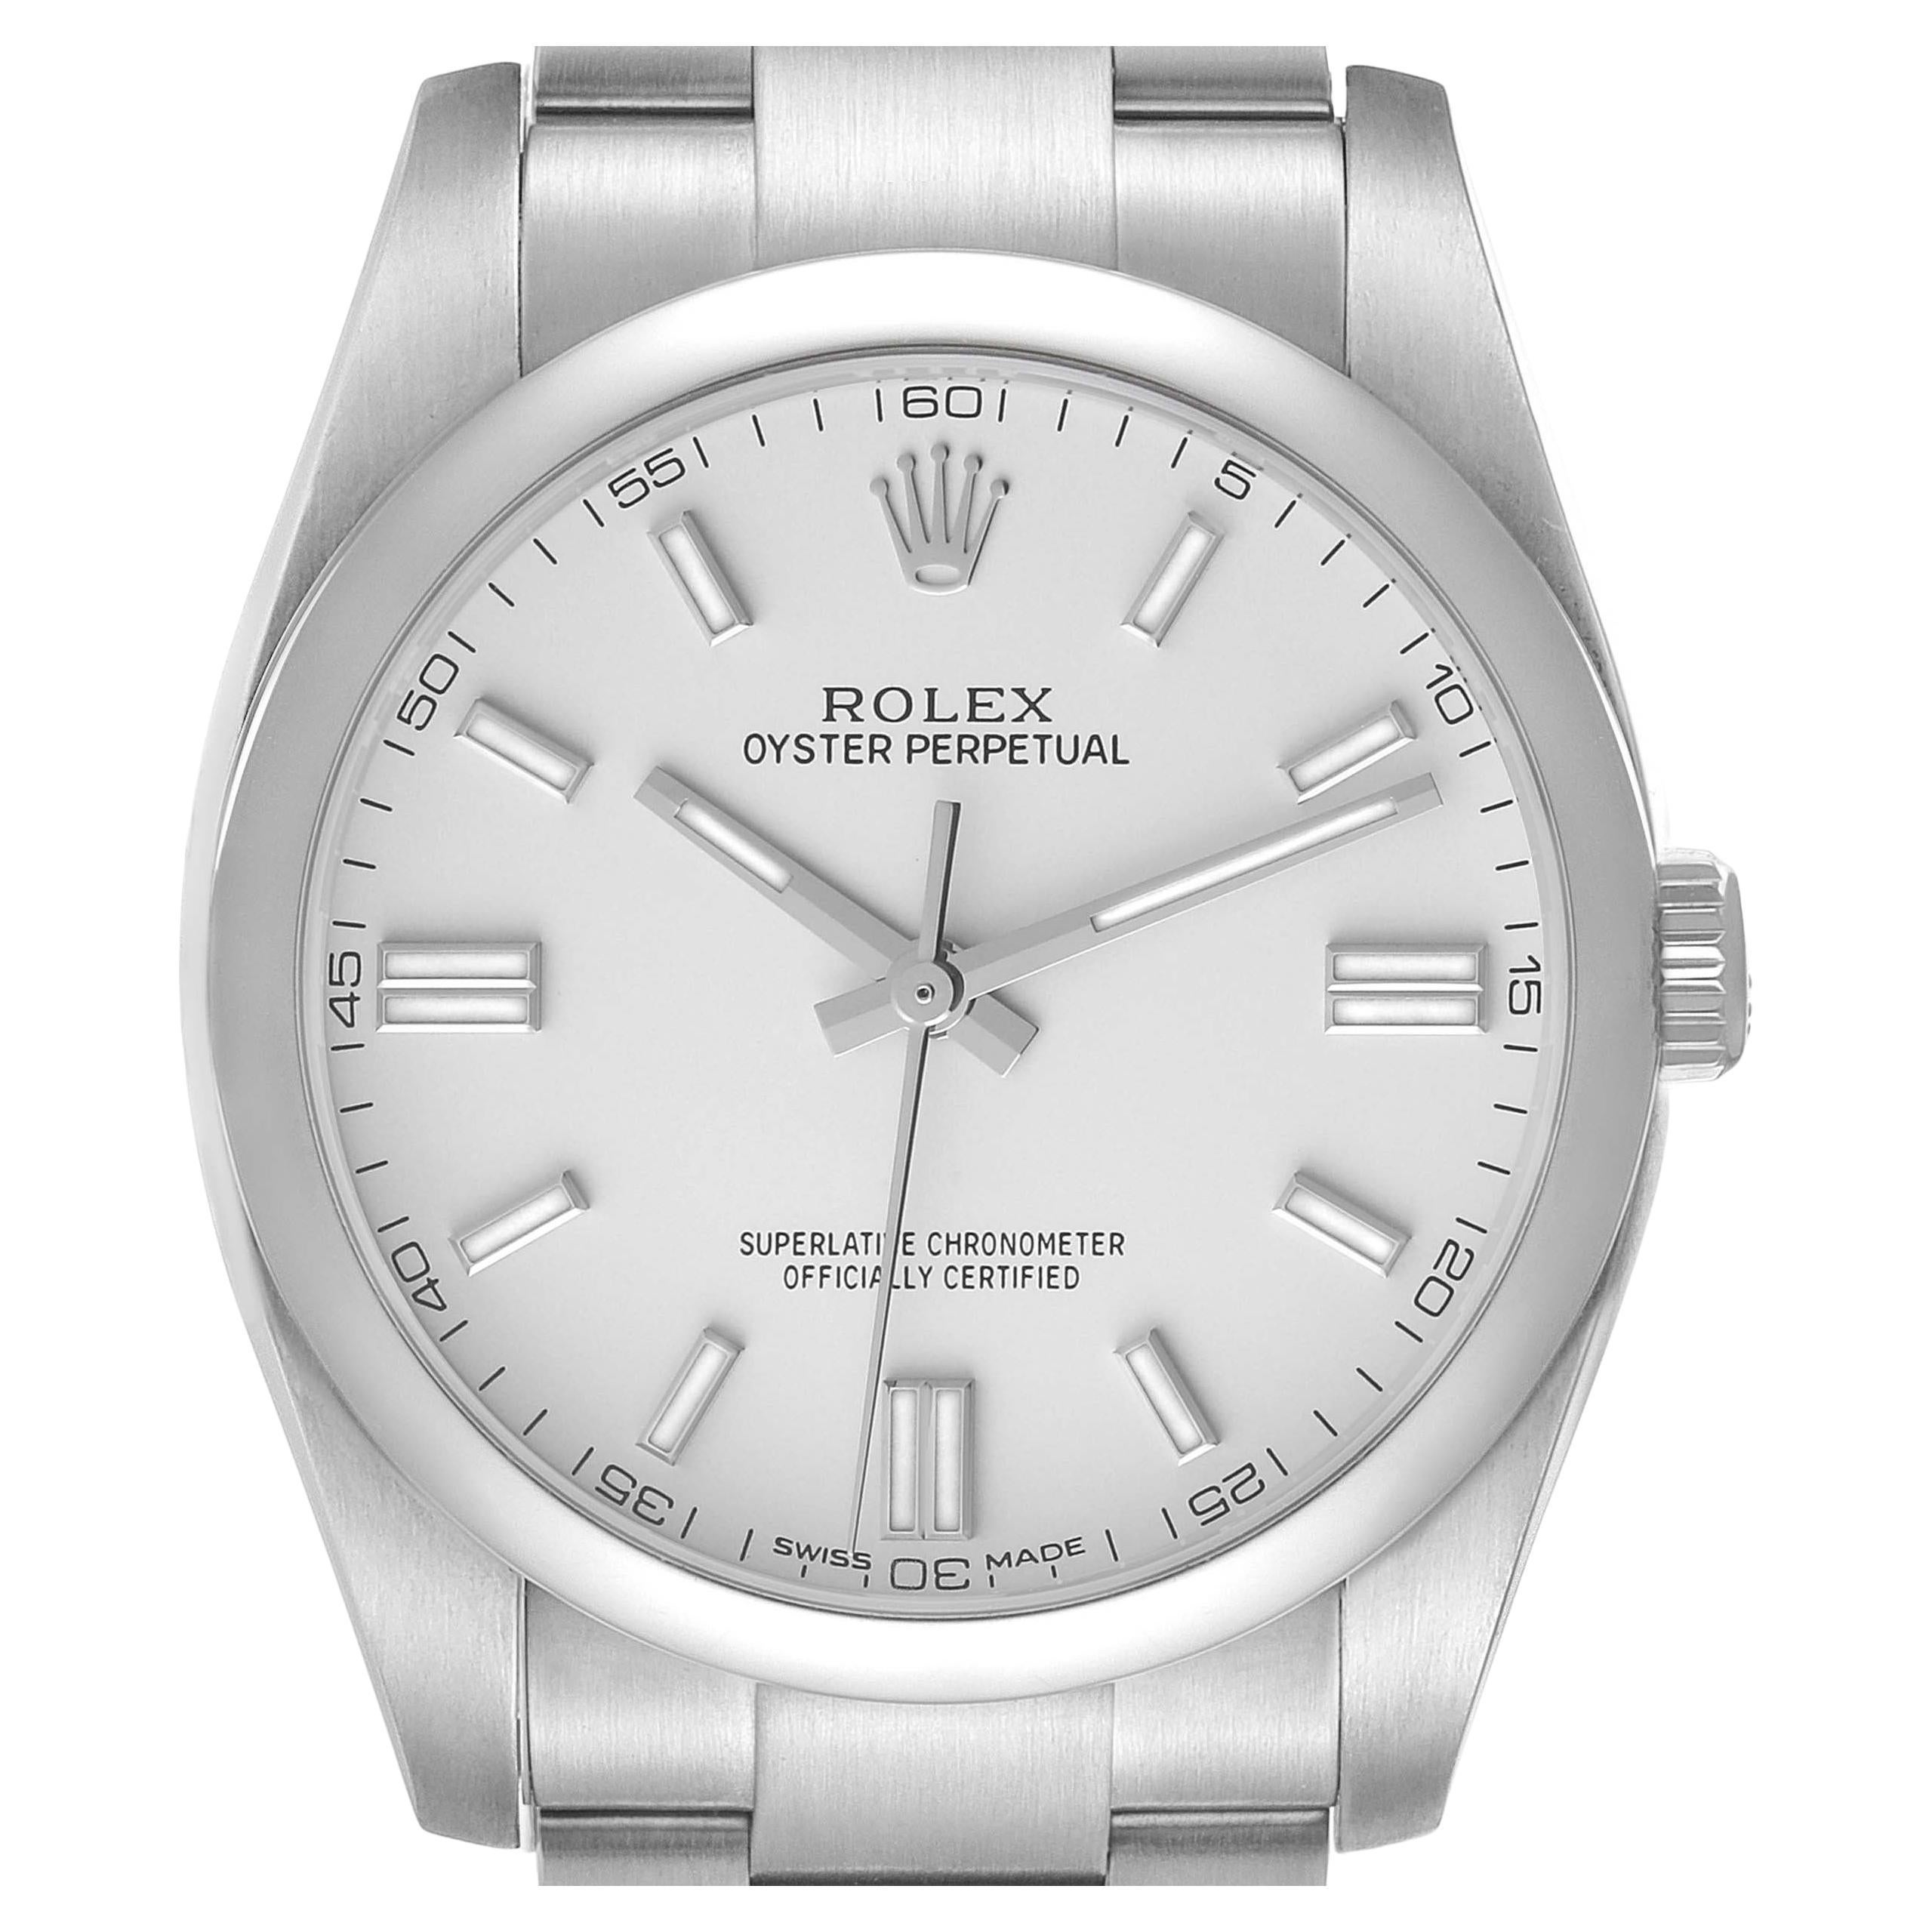 Rolex Oyster Perpetual 36 Silver Dial Steel Mens Watch 116000 Box Card